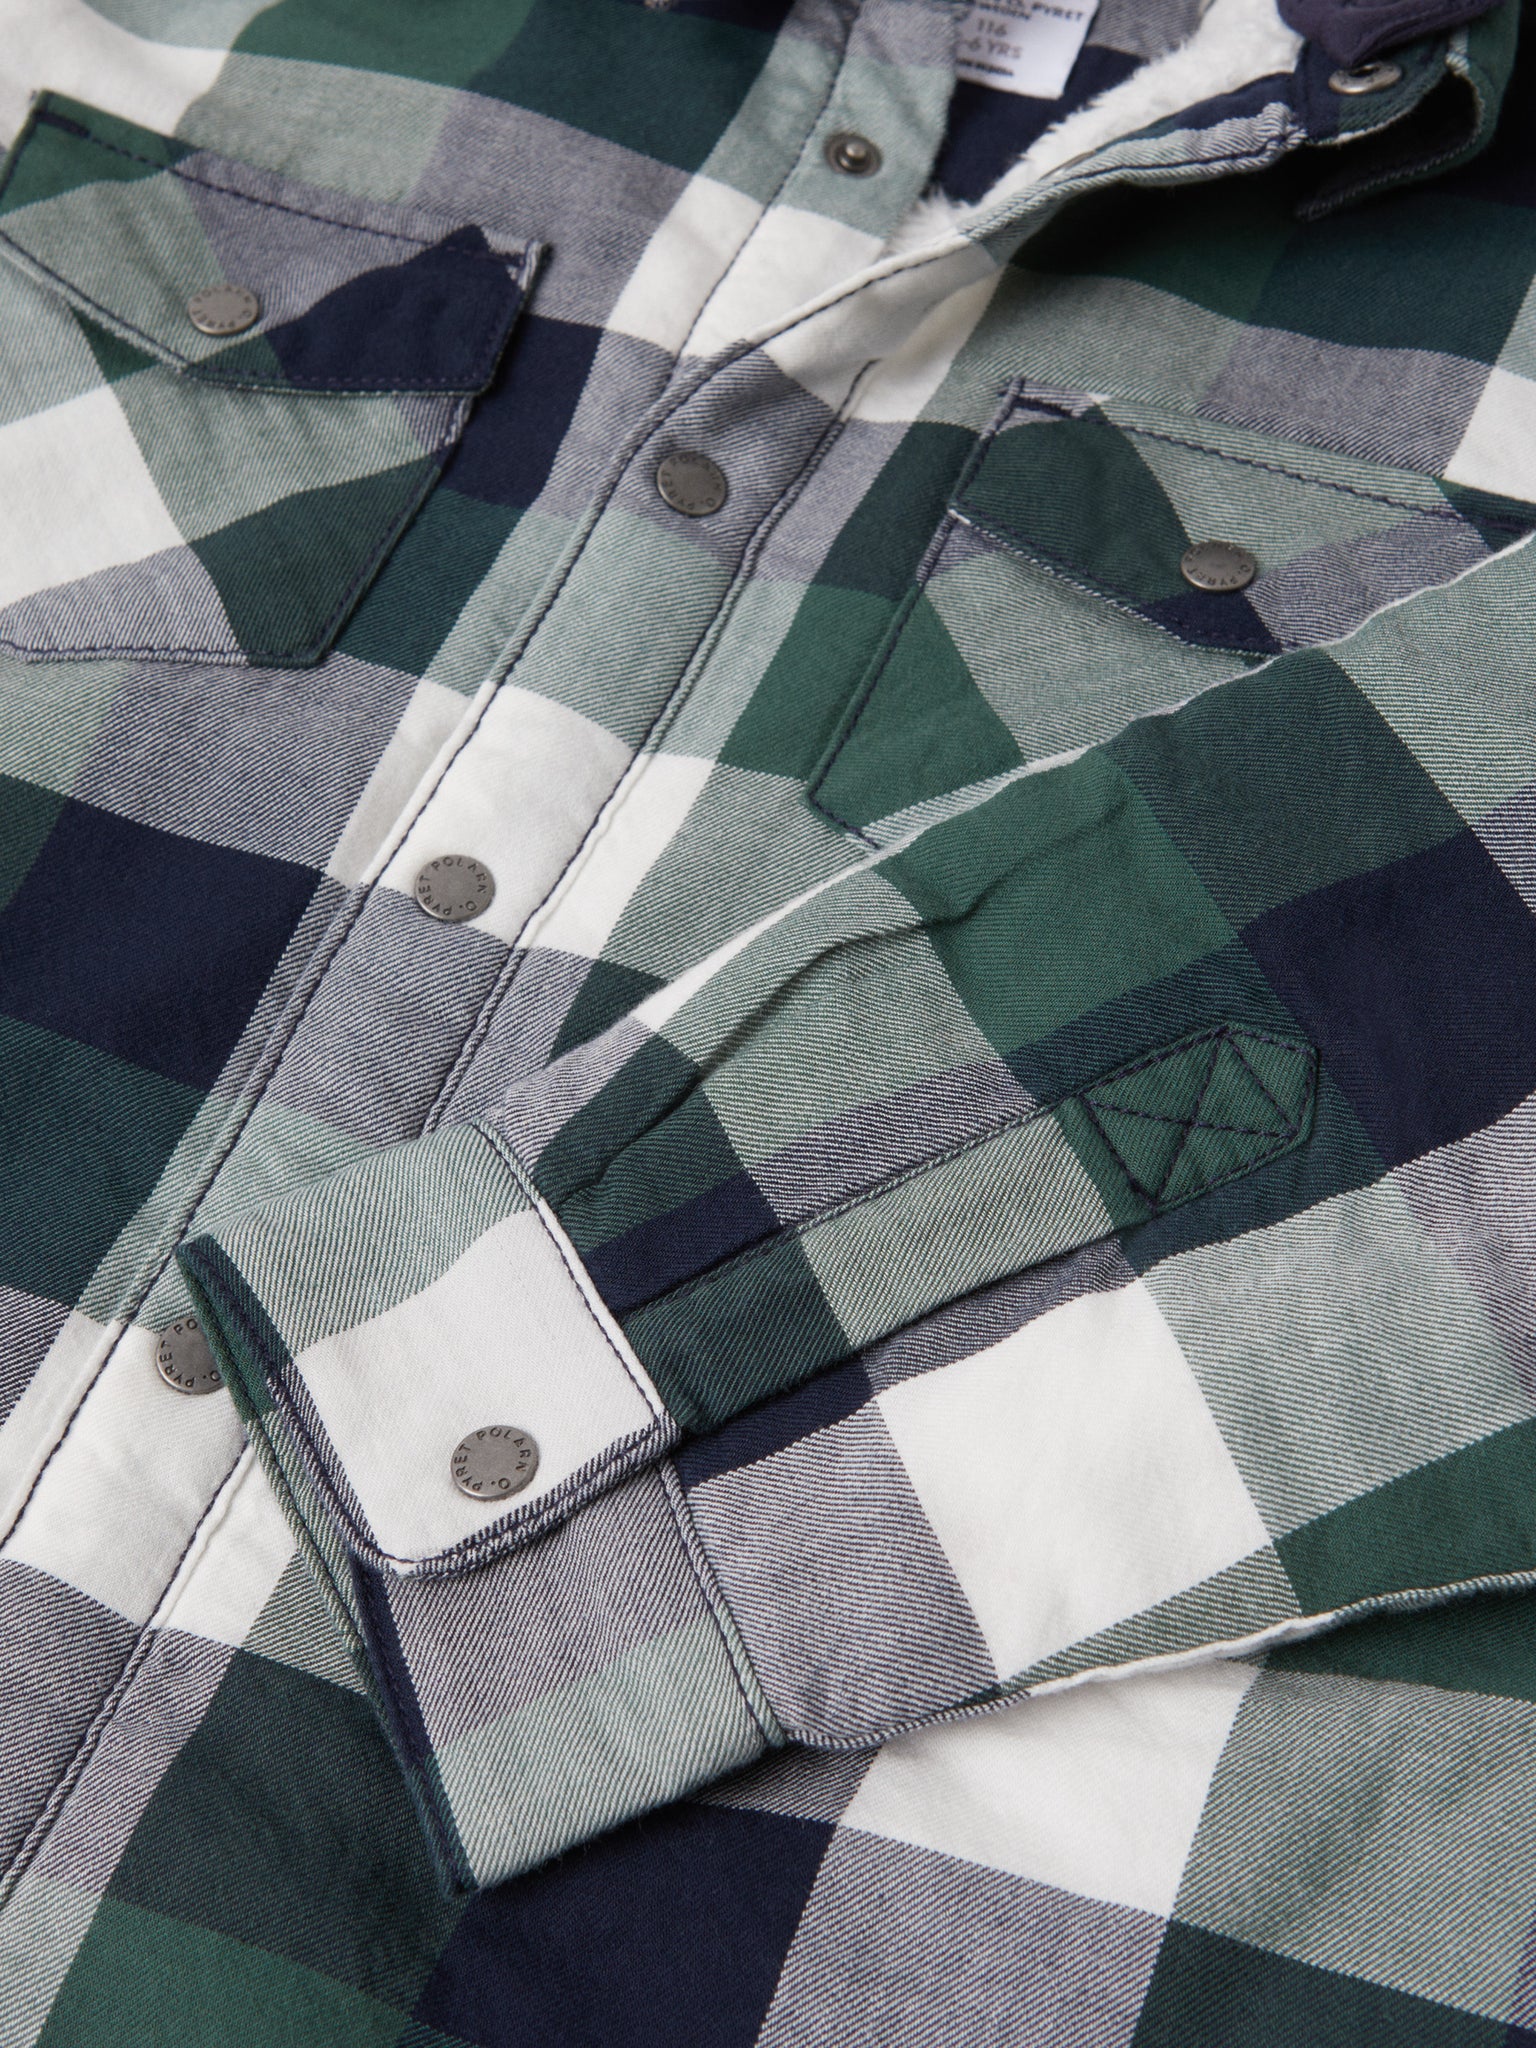 Navy Checked Kids Shirt from the Polarn O. Pyret kidswear collection. Clothes made using sustainably sourced materials.